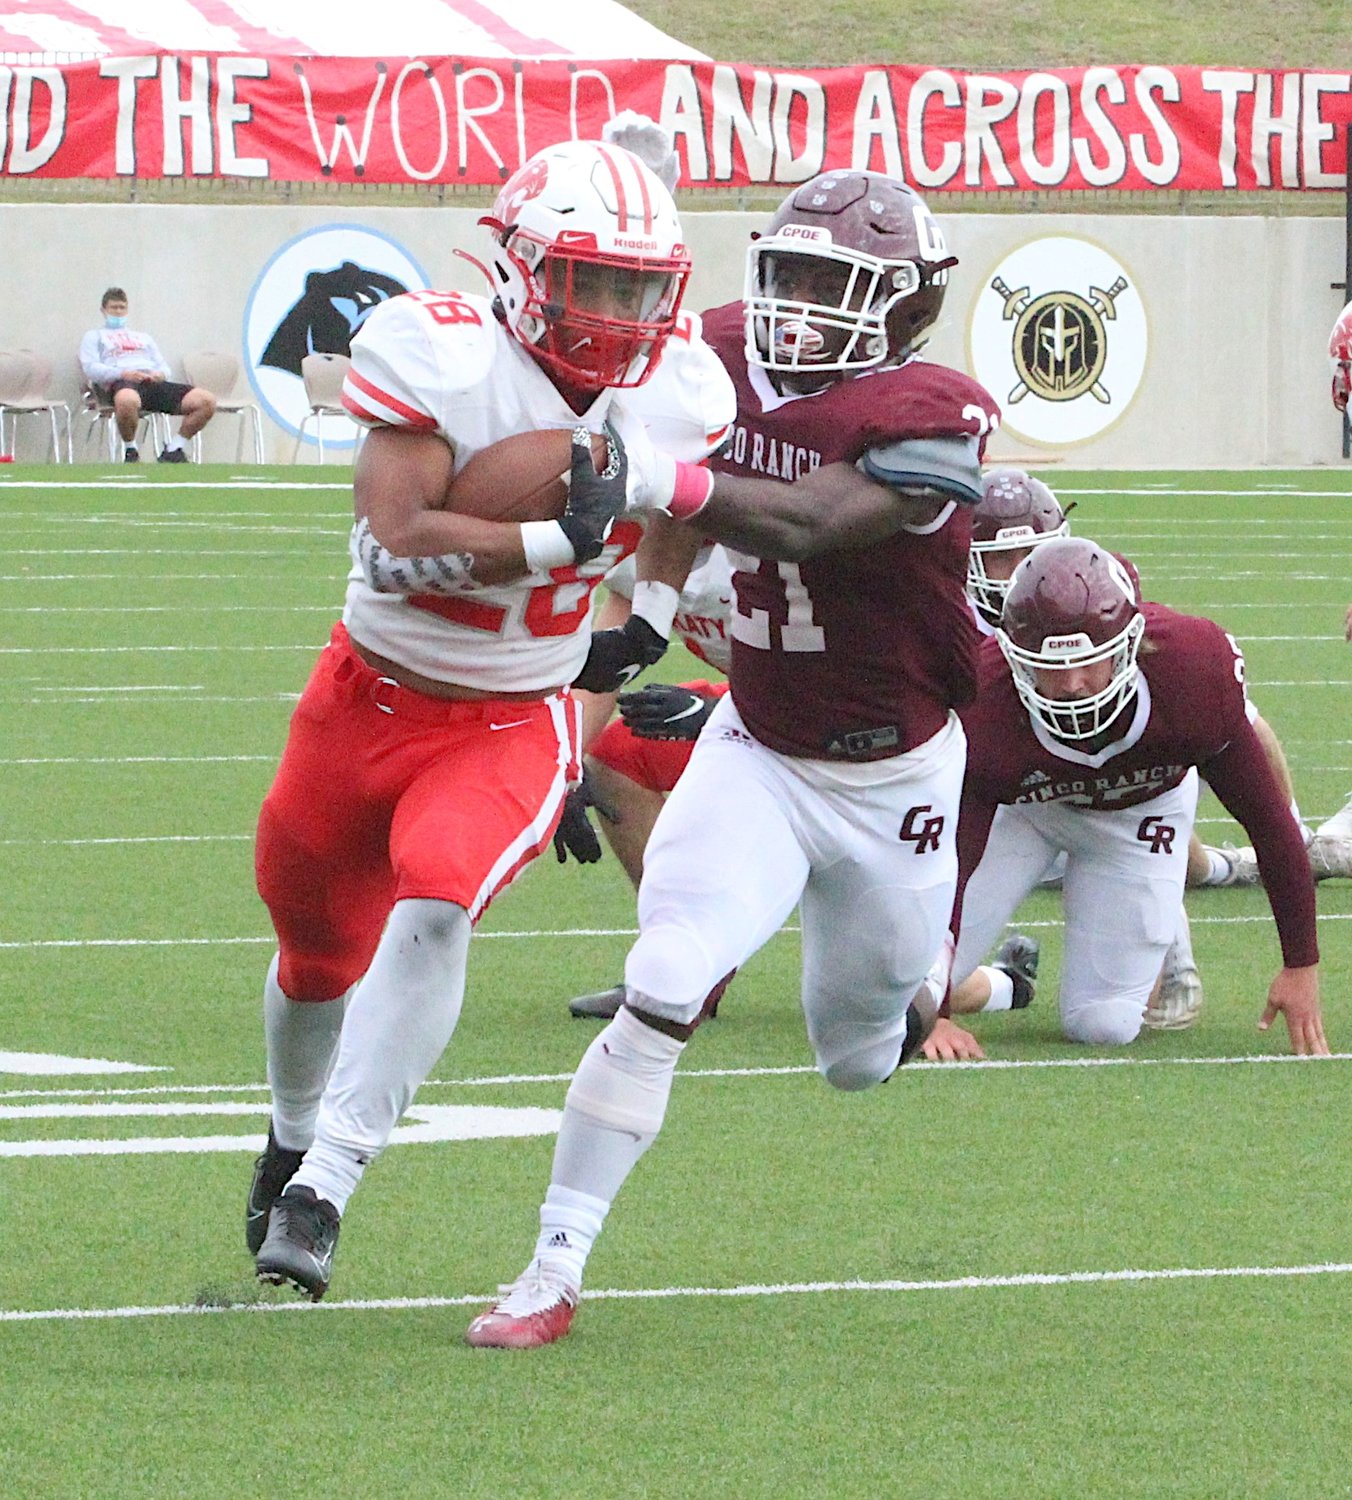 Katy High senior running back Jalen Davis had 87 yards and two touchdowns during the Tigers' win over Cinco Ranch on Oct. 24 at Legacy Stadium.